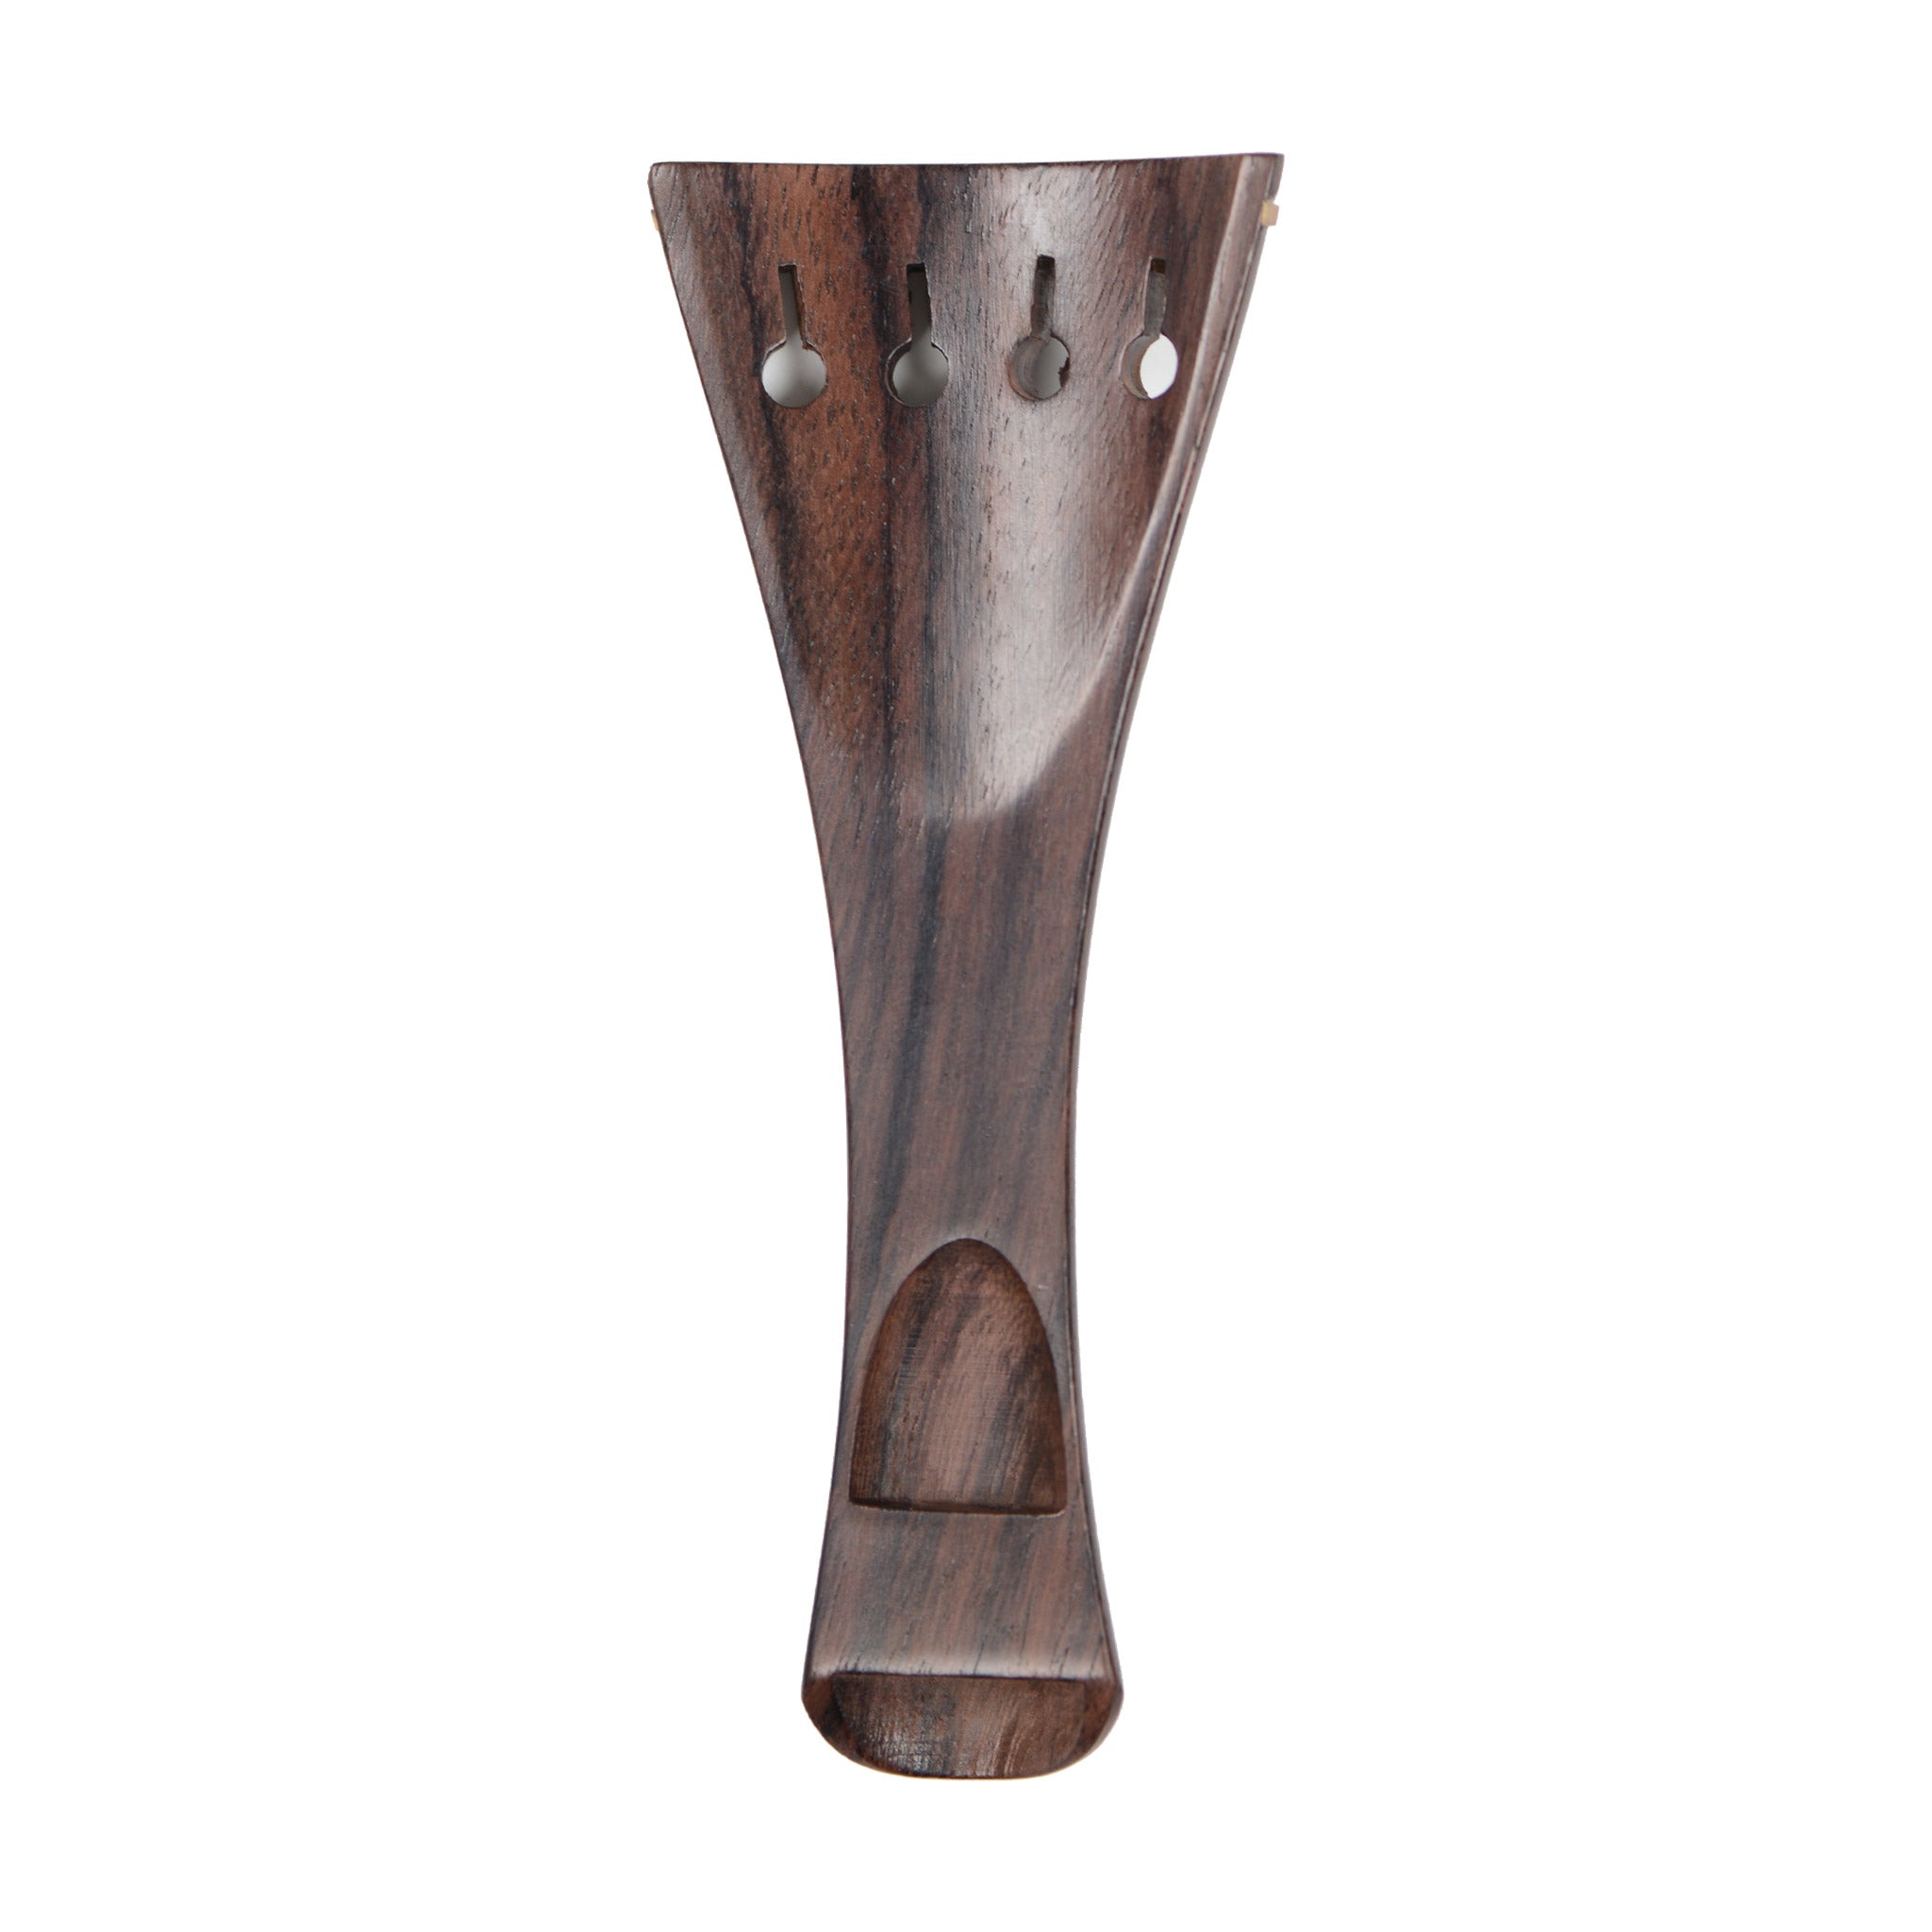 Hill Model Rosewood Violin Tailpiece with Pearwood Trim